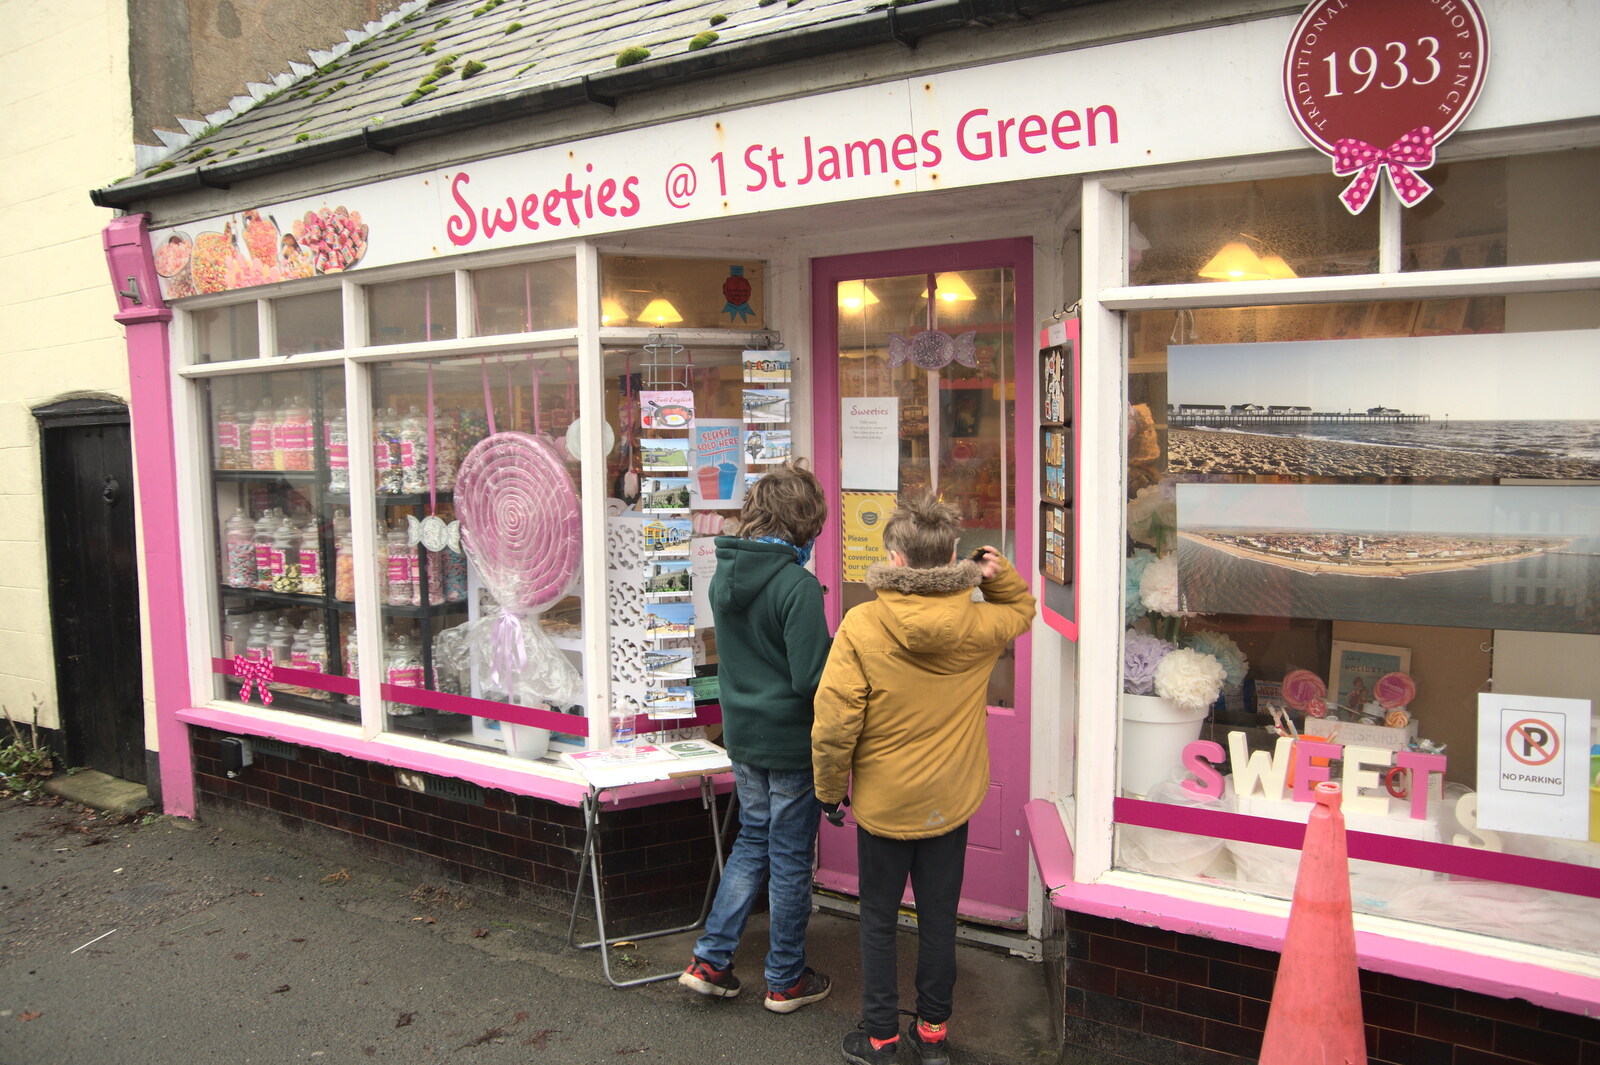 The boys head into Sweeties on St. James Green from A Few Hours at the Seaside, Southwold, Suffolk - 27th December 2021